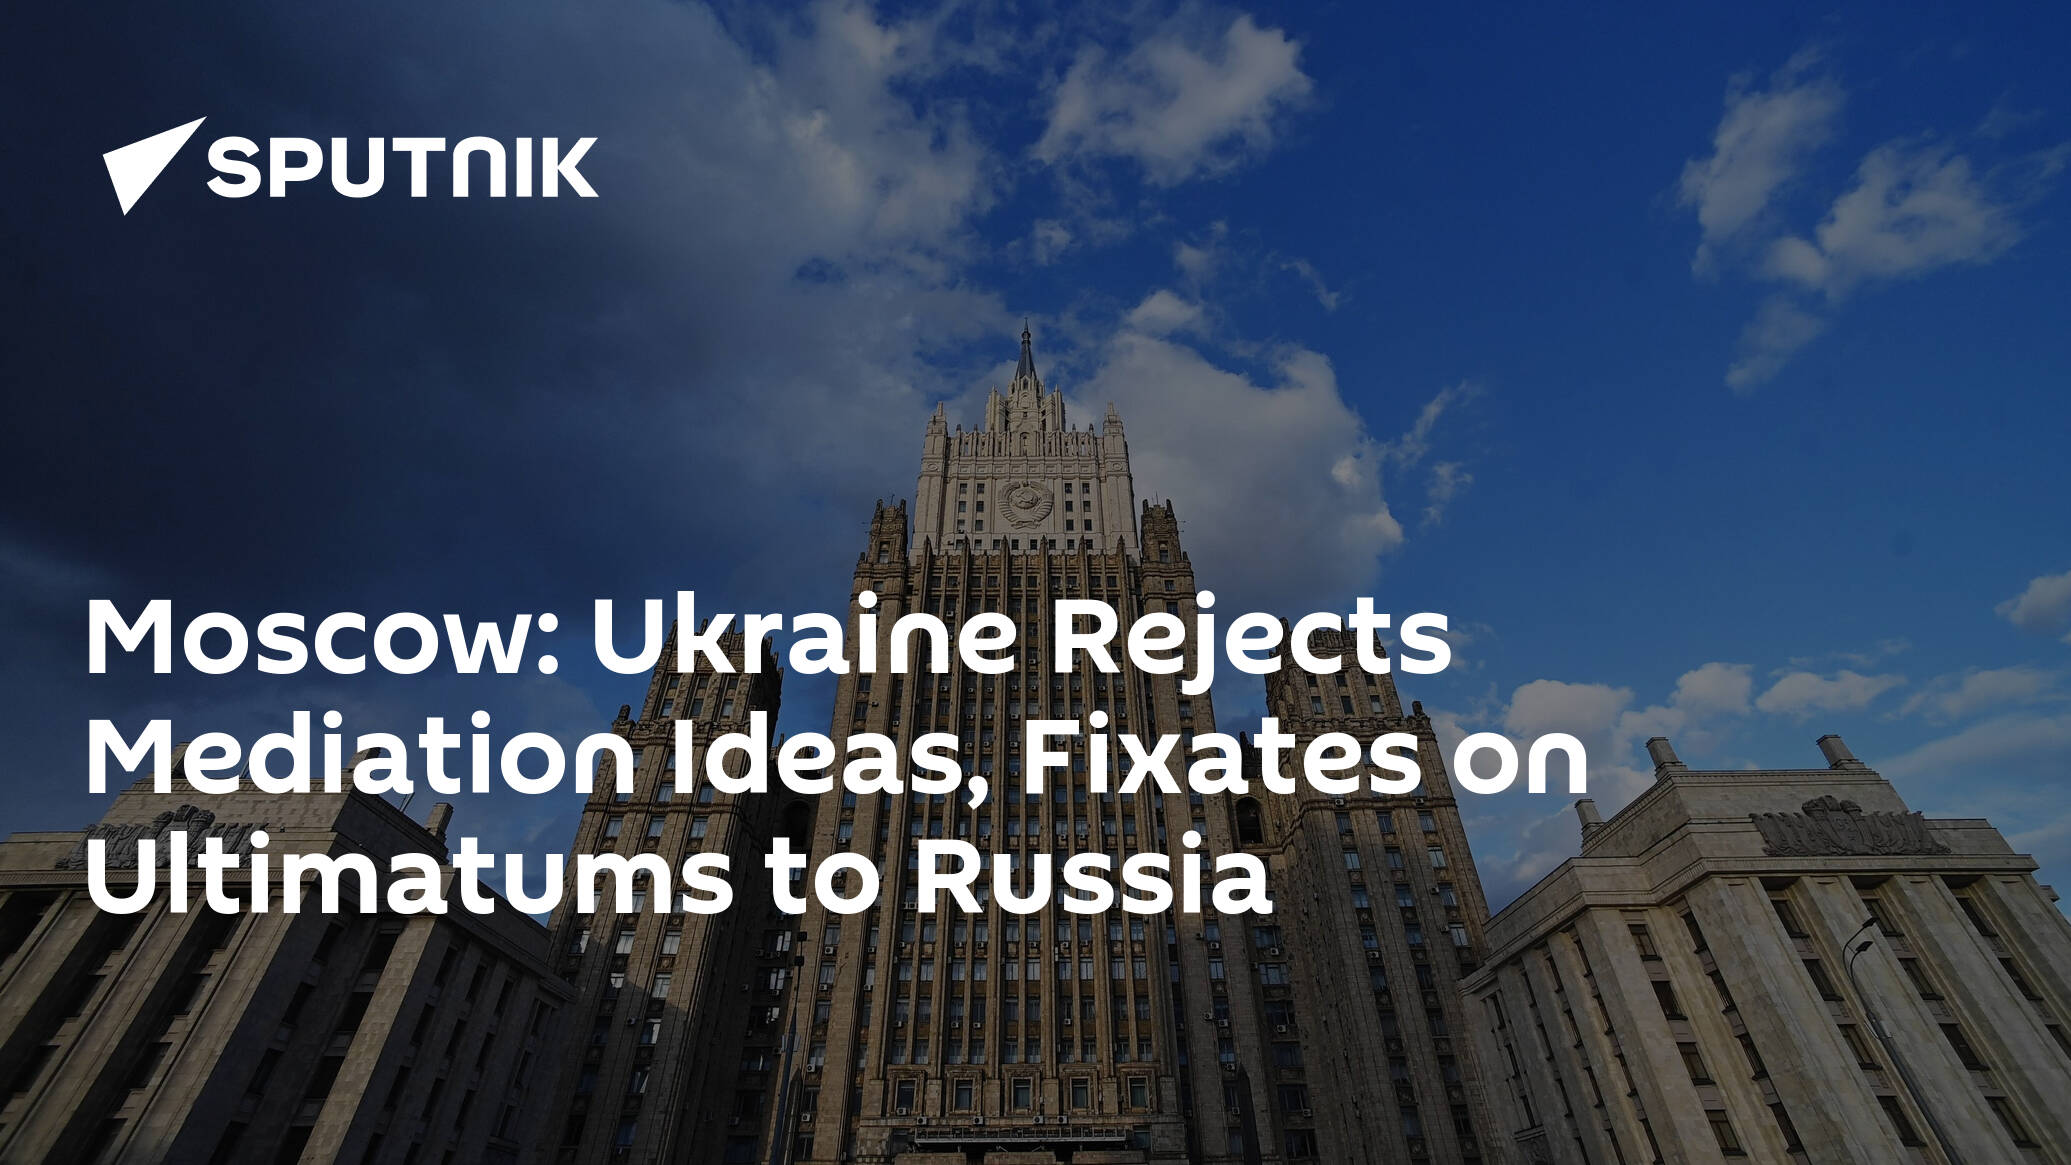 Moscow: Ukraine Rejects Mediation Ideas, Fixates on Ultimatums to Russia